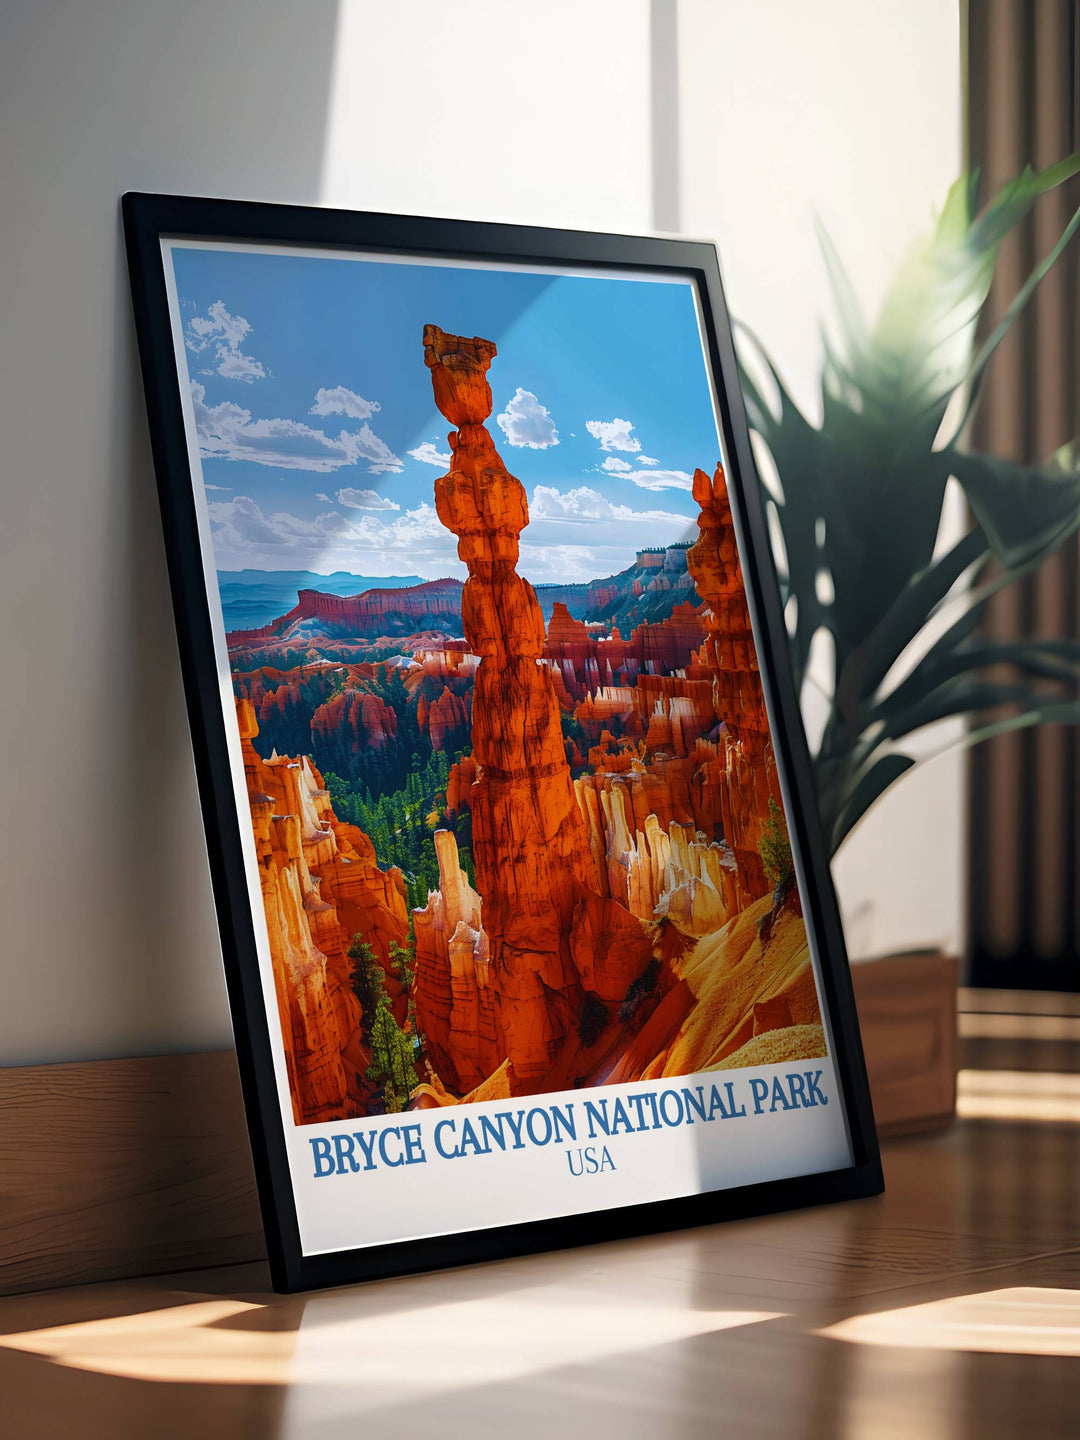 Thors Hammer travel poster featuring the stunning landscapes of Bryce Canyon. Perfect for home decor or as a thoughtful gift for outdoor enthusiasts. High quality print with vibrant colors and detailed imagery.